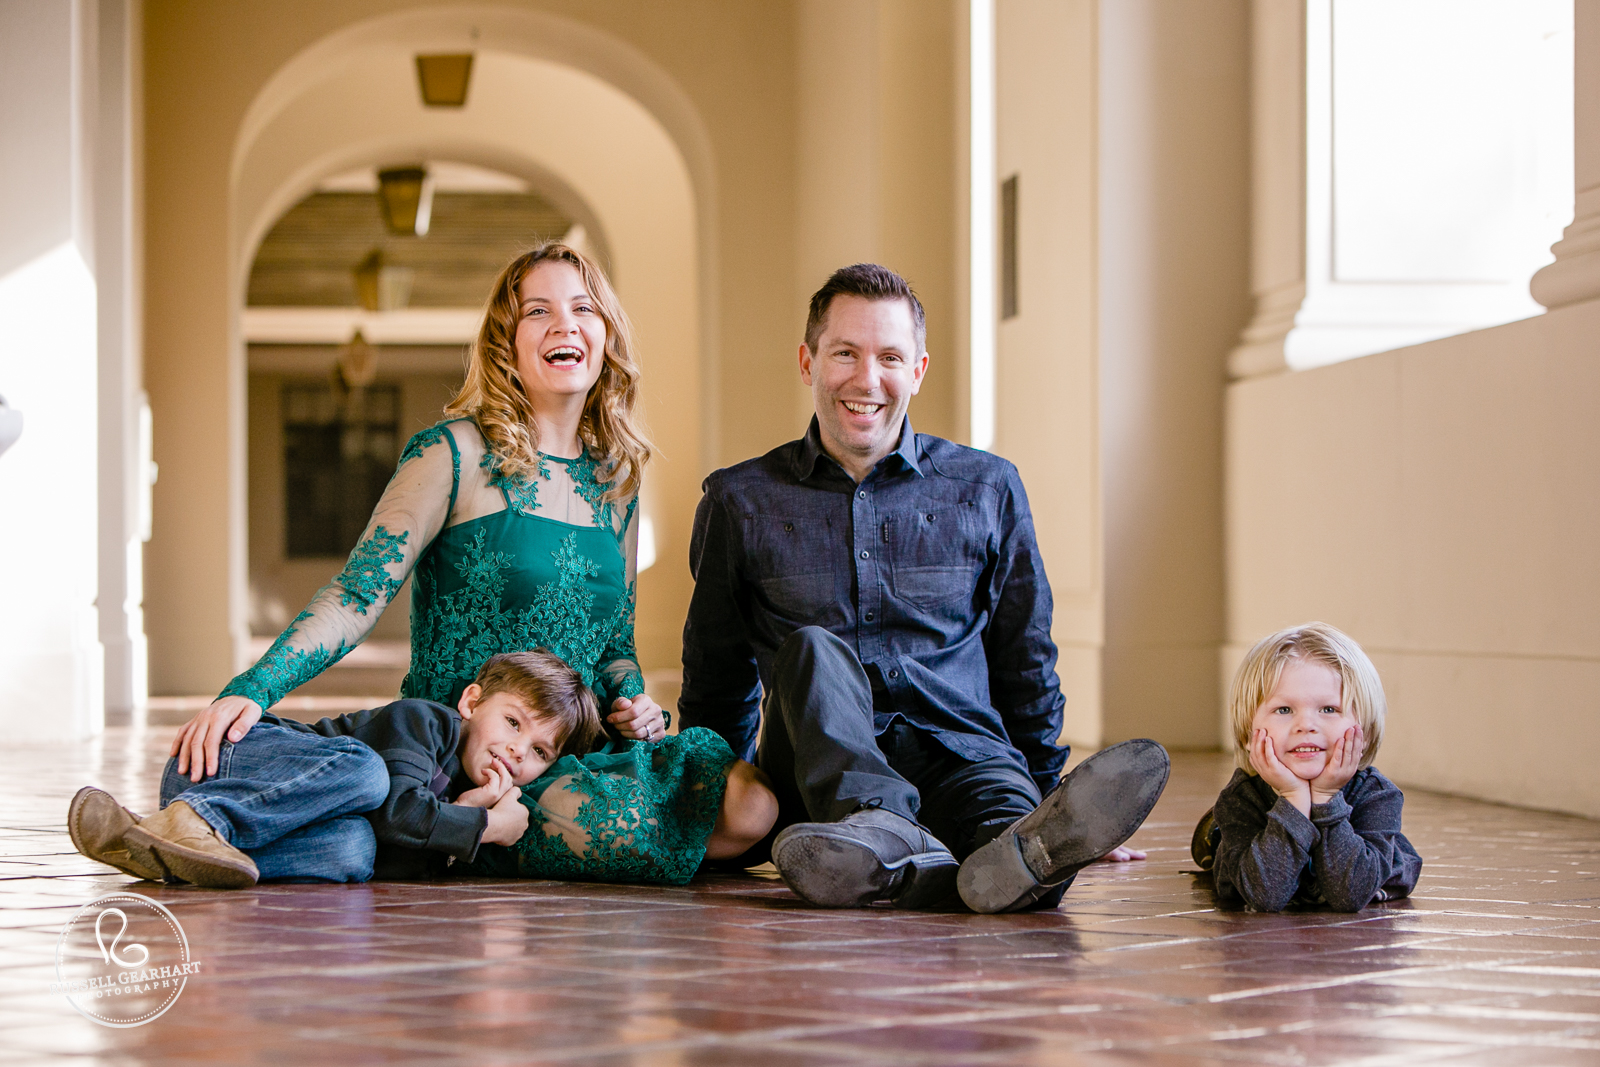 Pasadena Family Portrait: Hayes Family – Russell Gearhart Photography – www.gearhartphoto.com